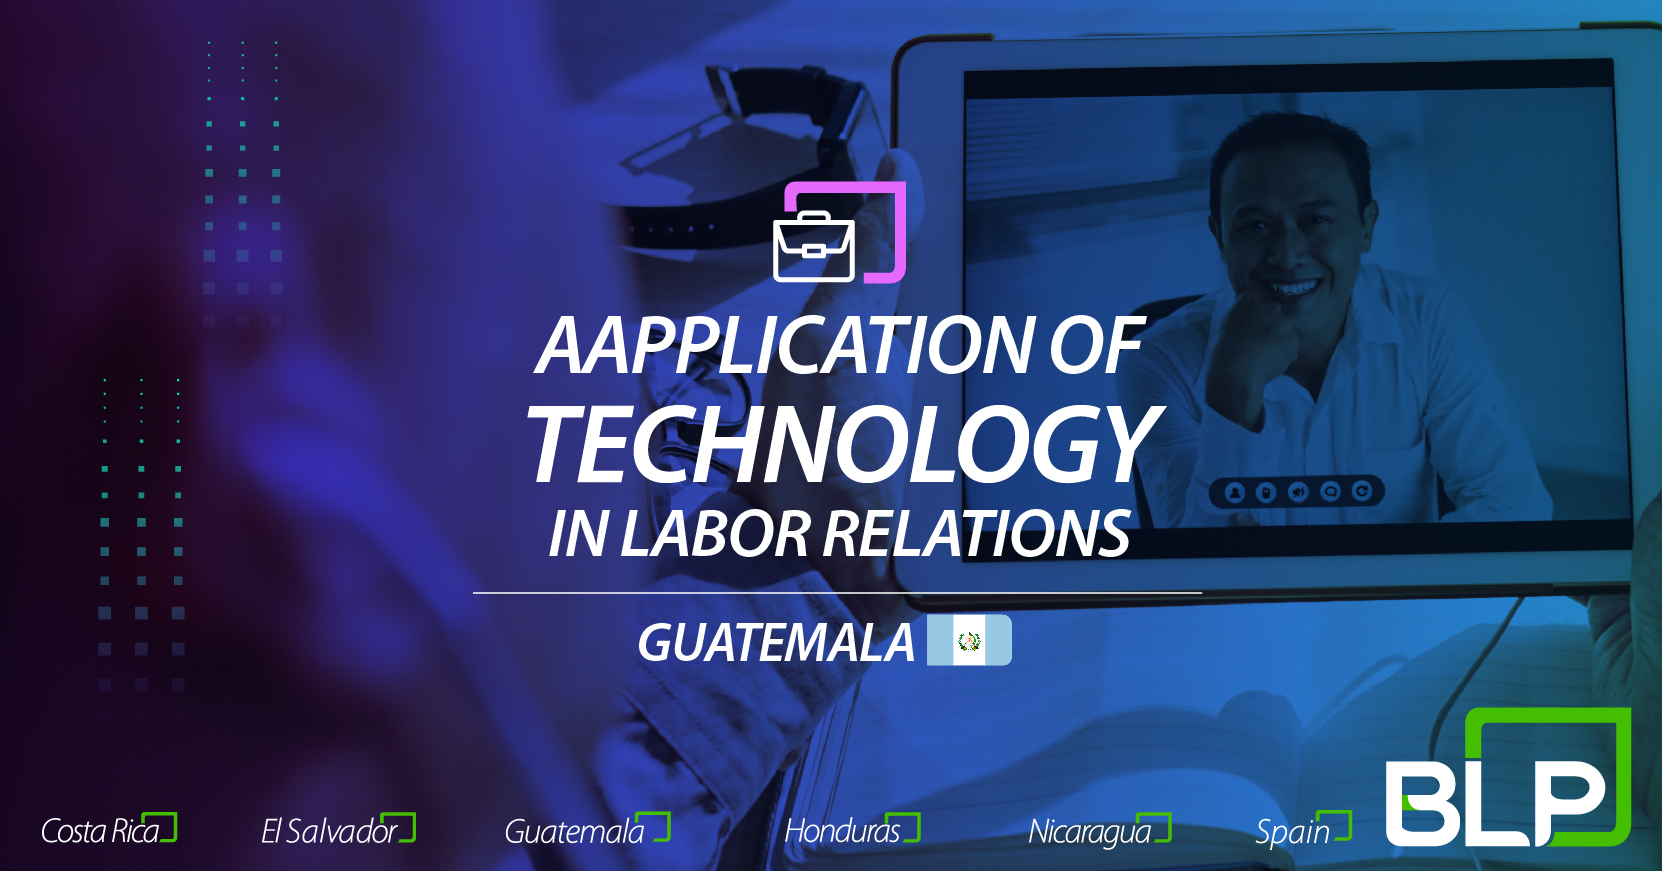 Application of technology in labor relations: perspectives from Guatemala